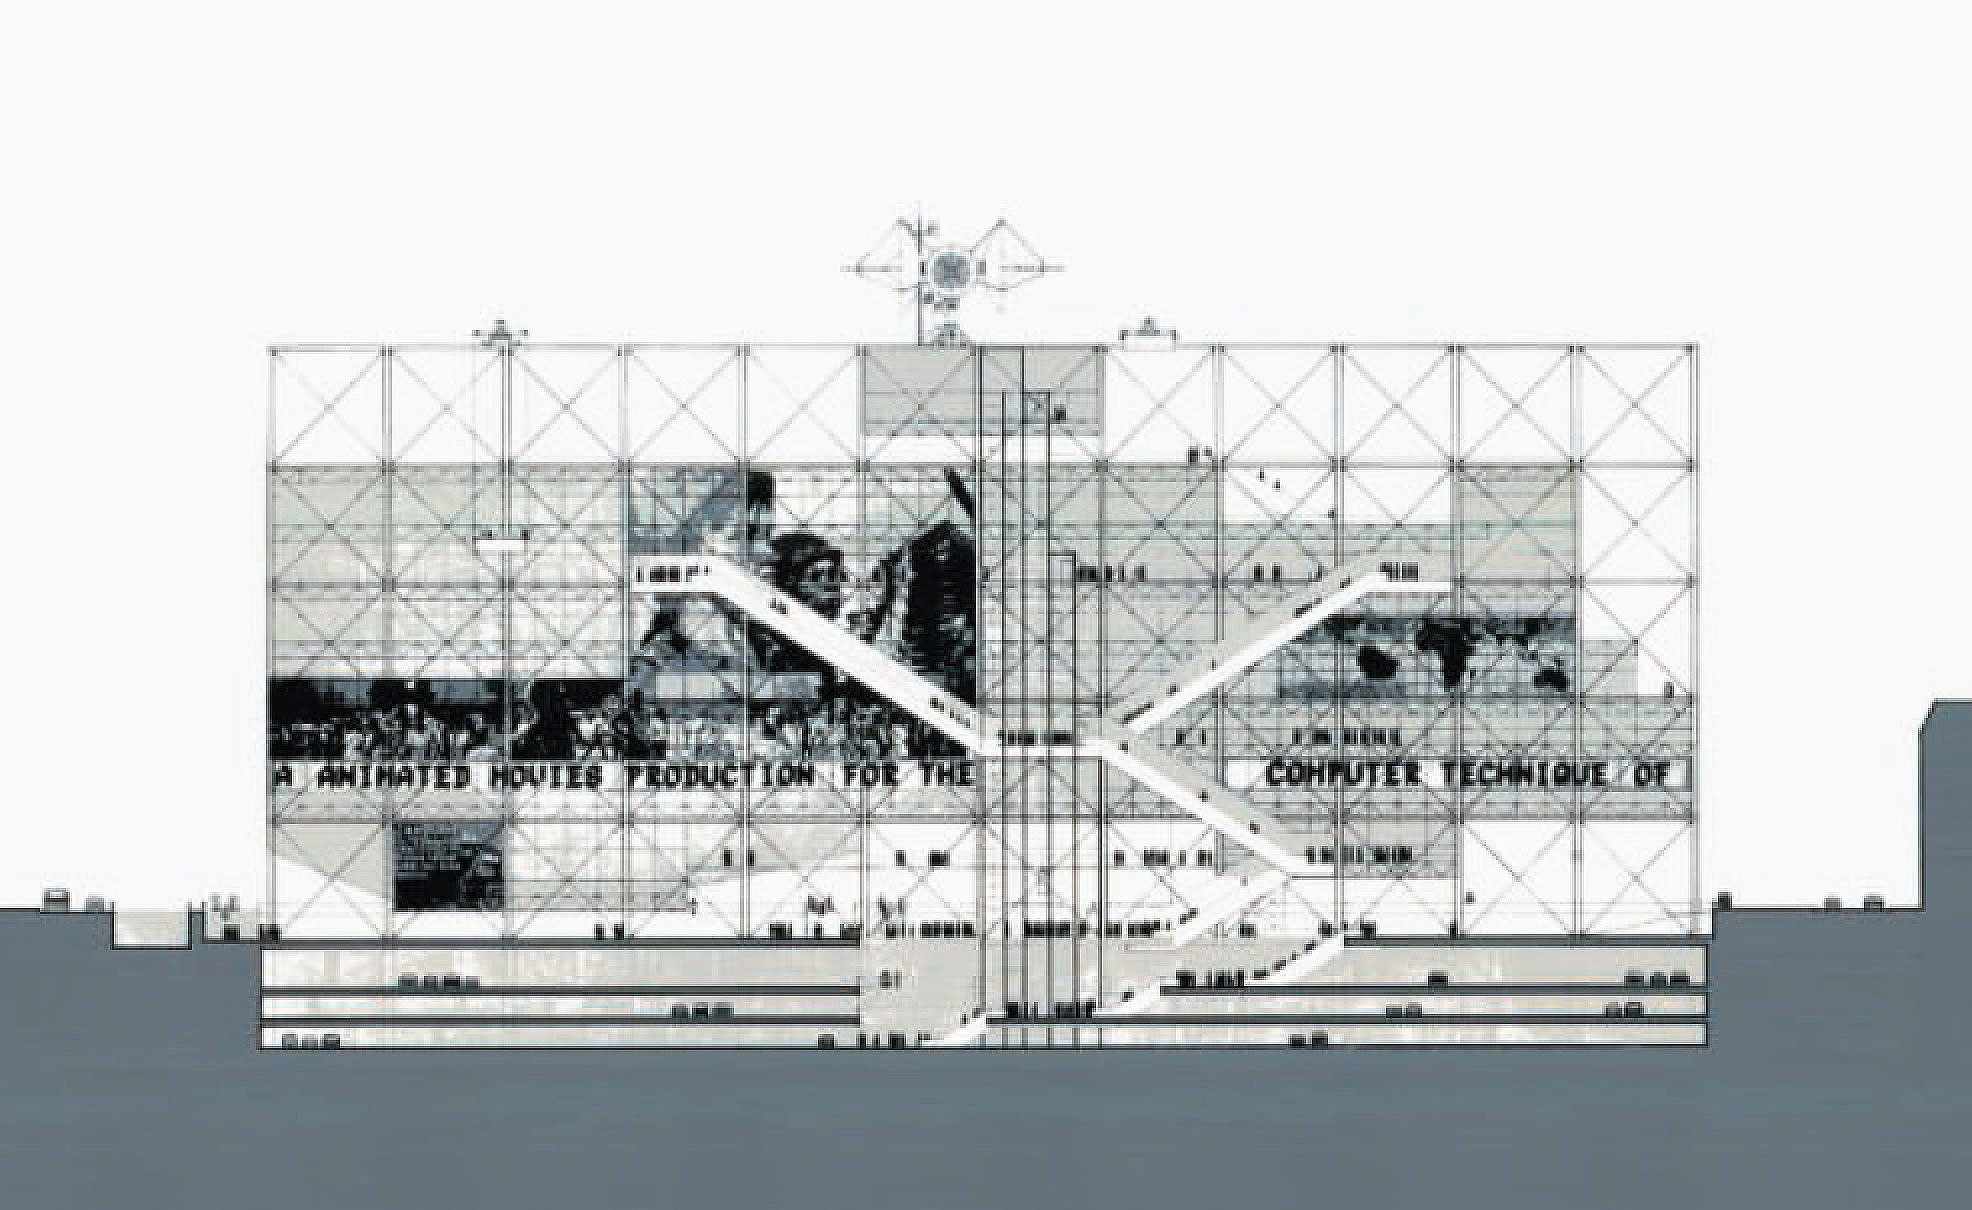 Renzo Piano and Richard Rogers - Pompidou Centre, 1971 Pencil on paper - as featured in Drawing Architecture